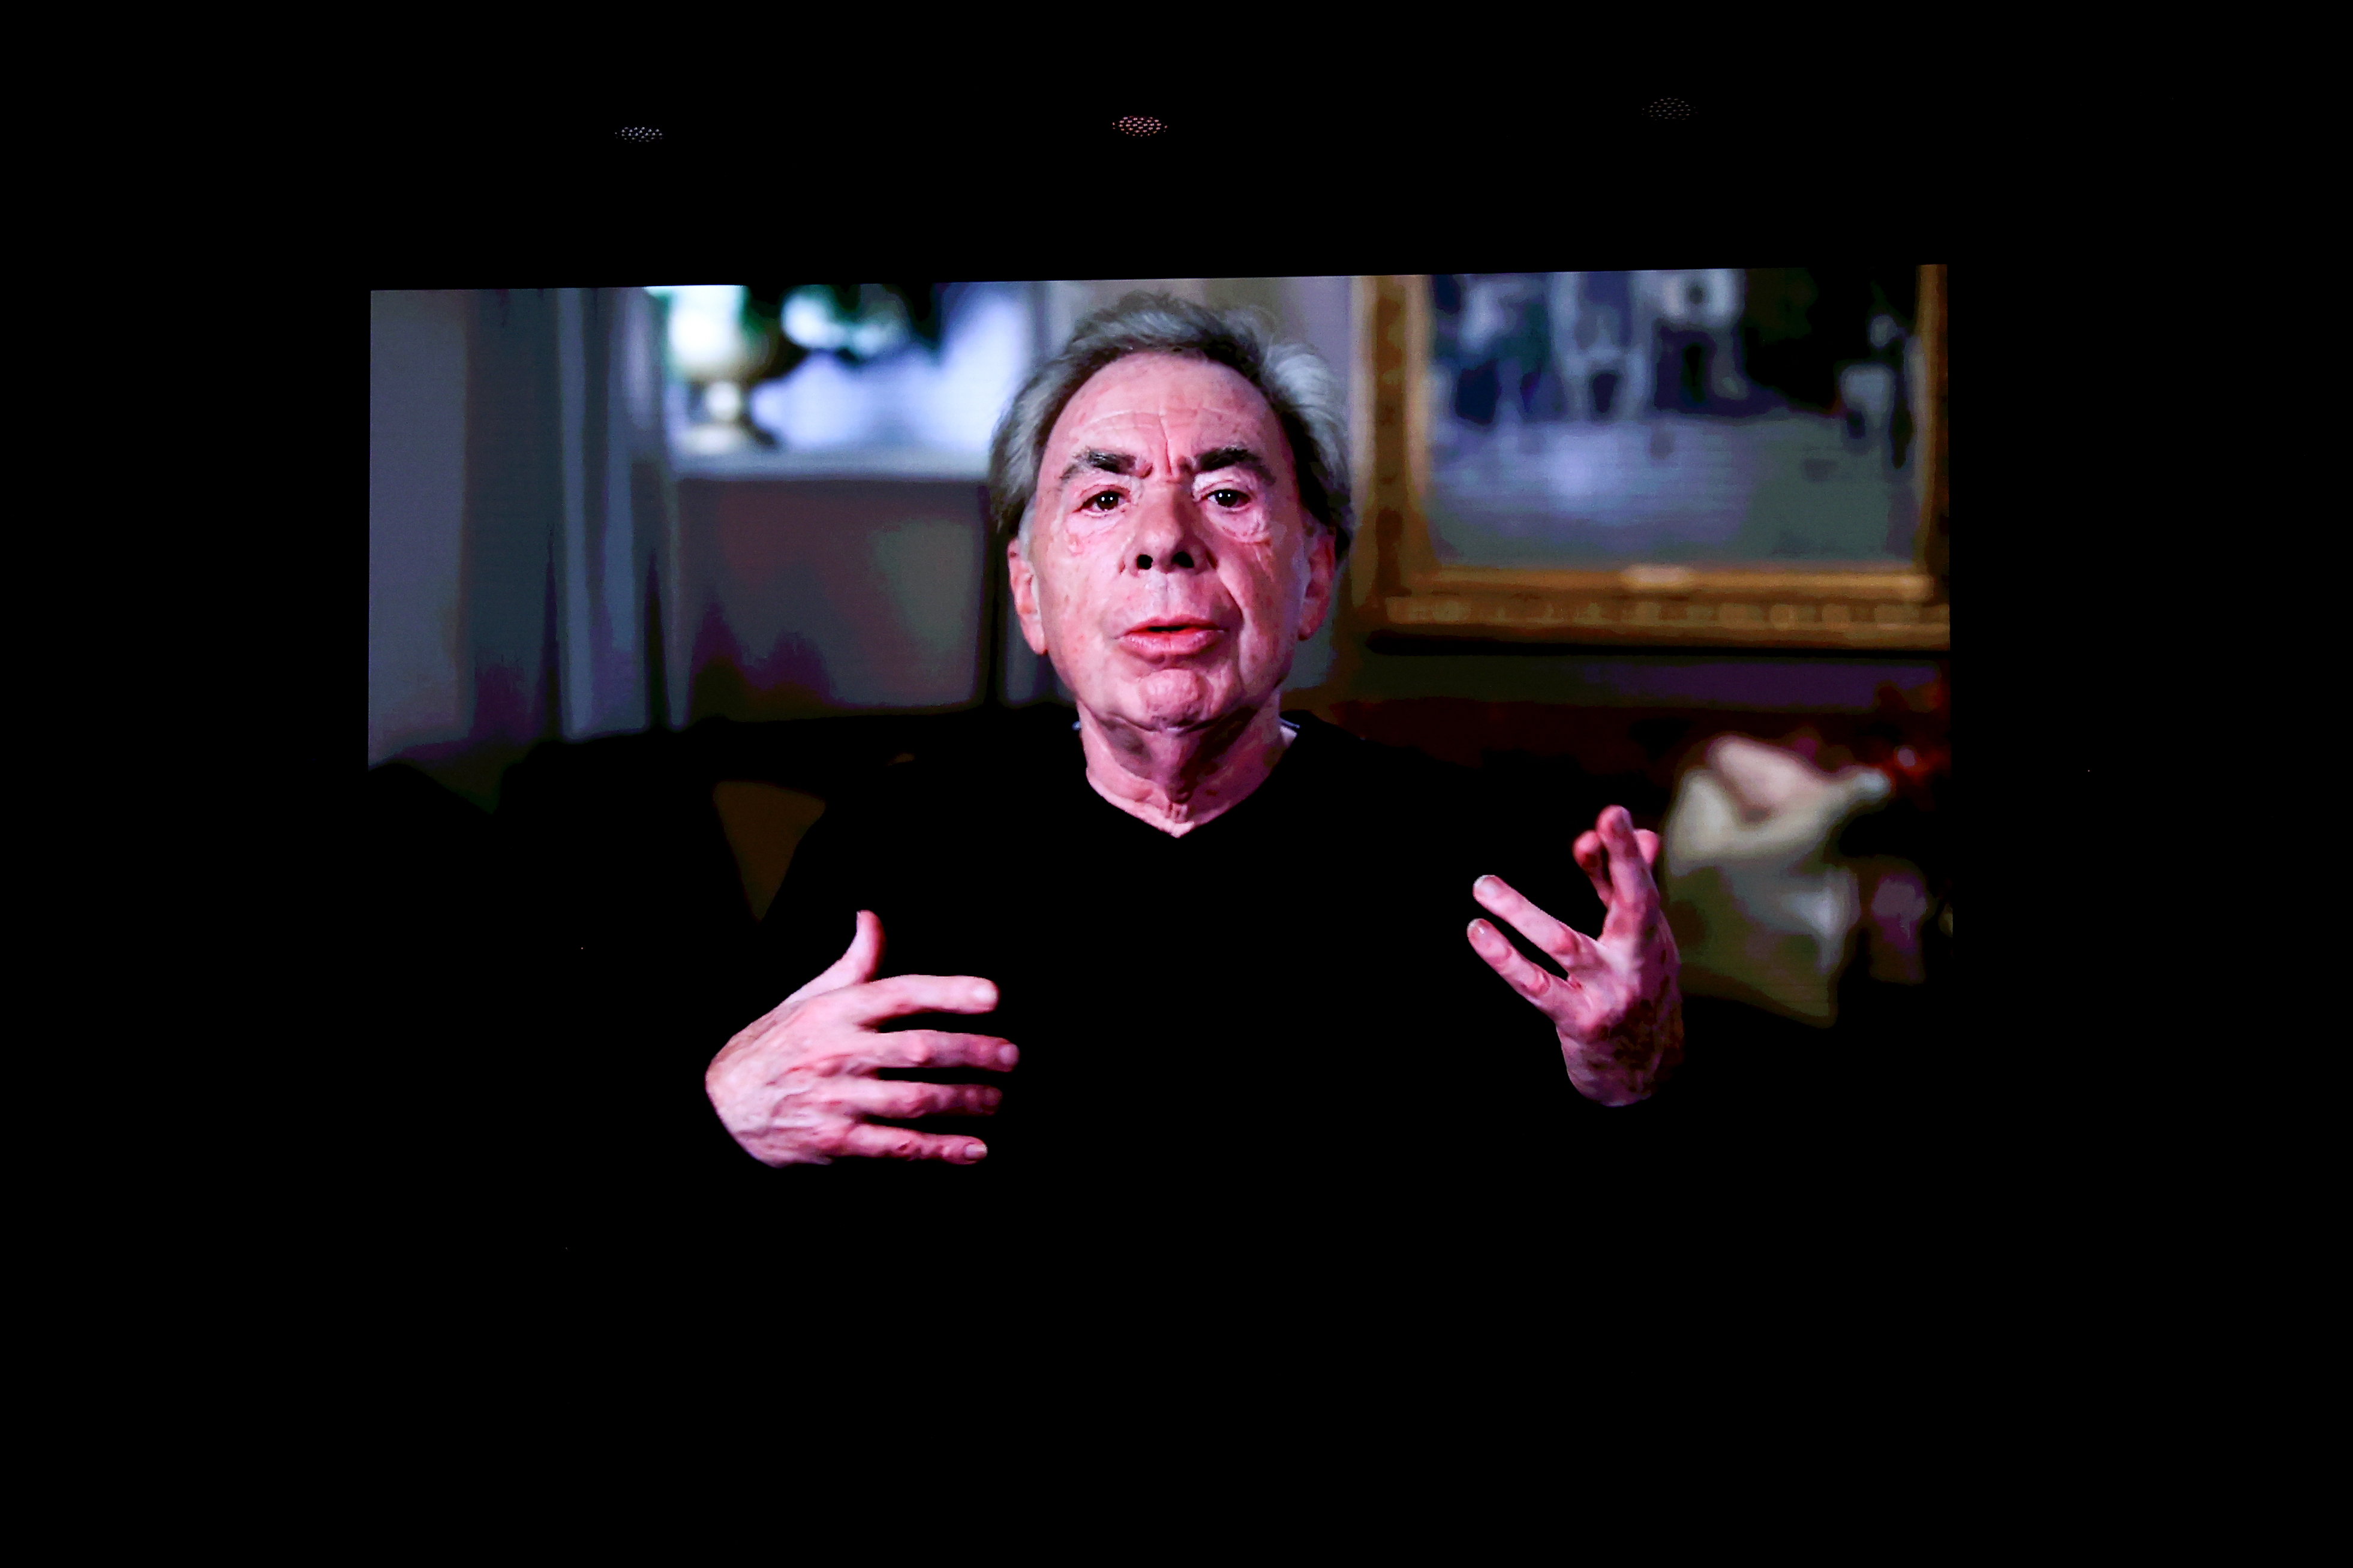 A video tribute from Andrew Lloyd Webber